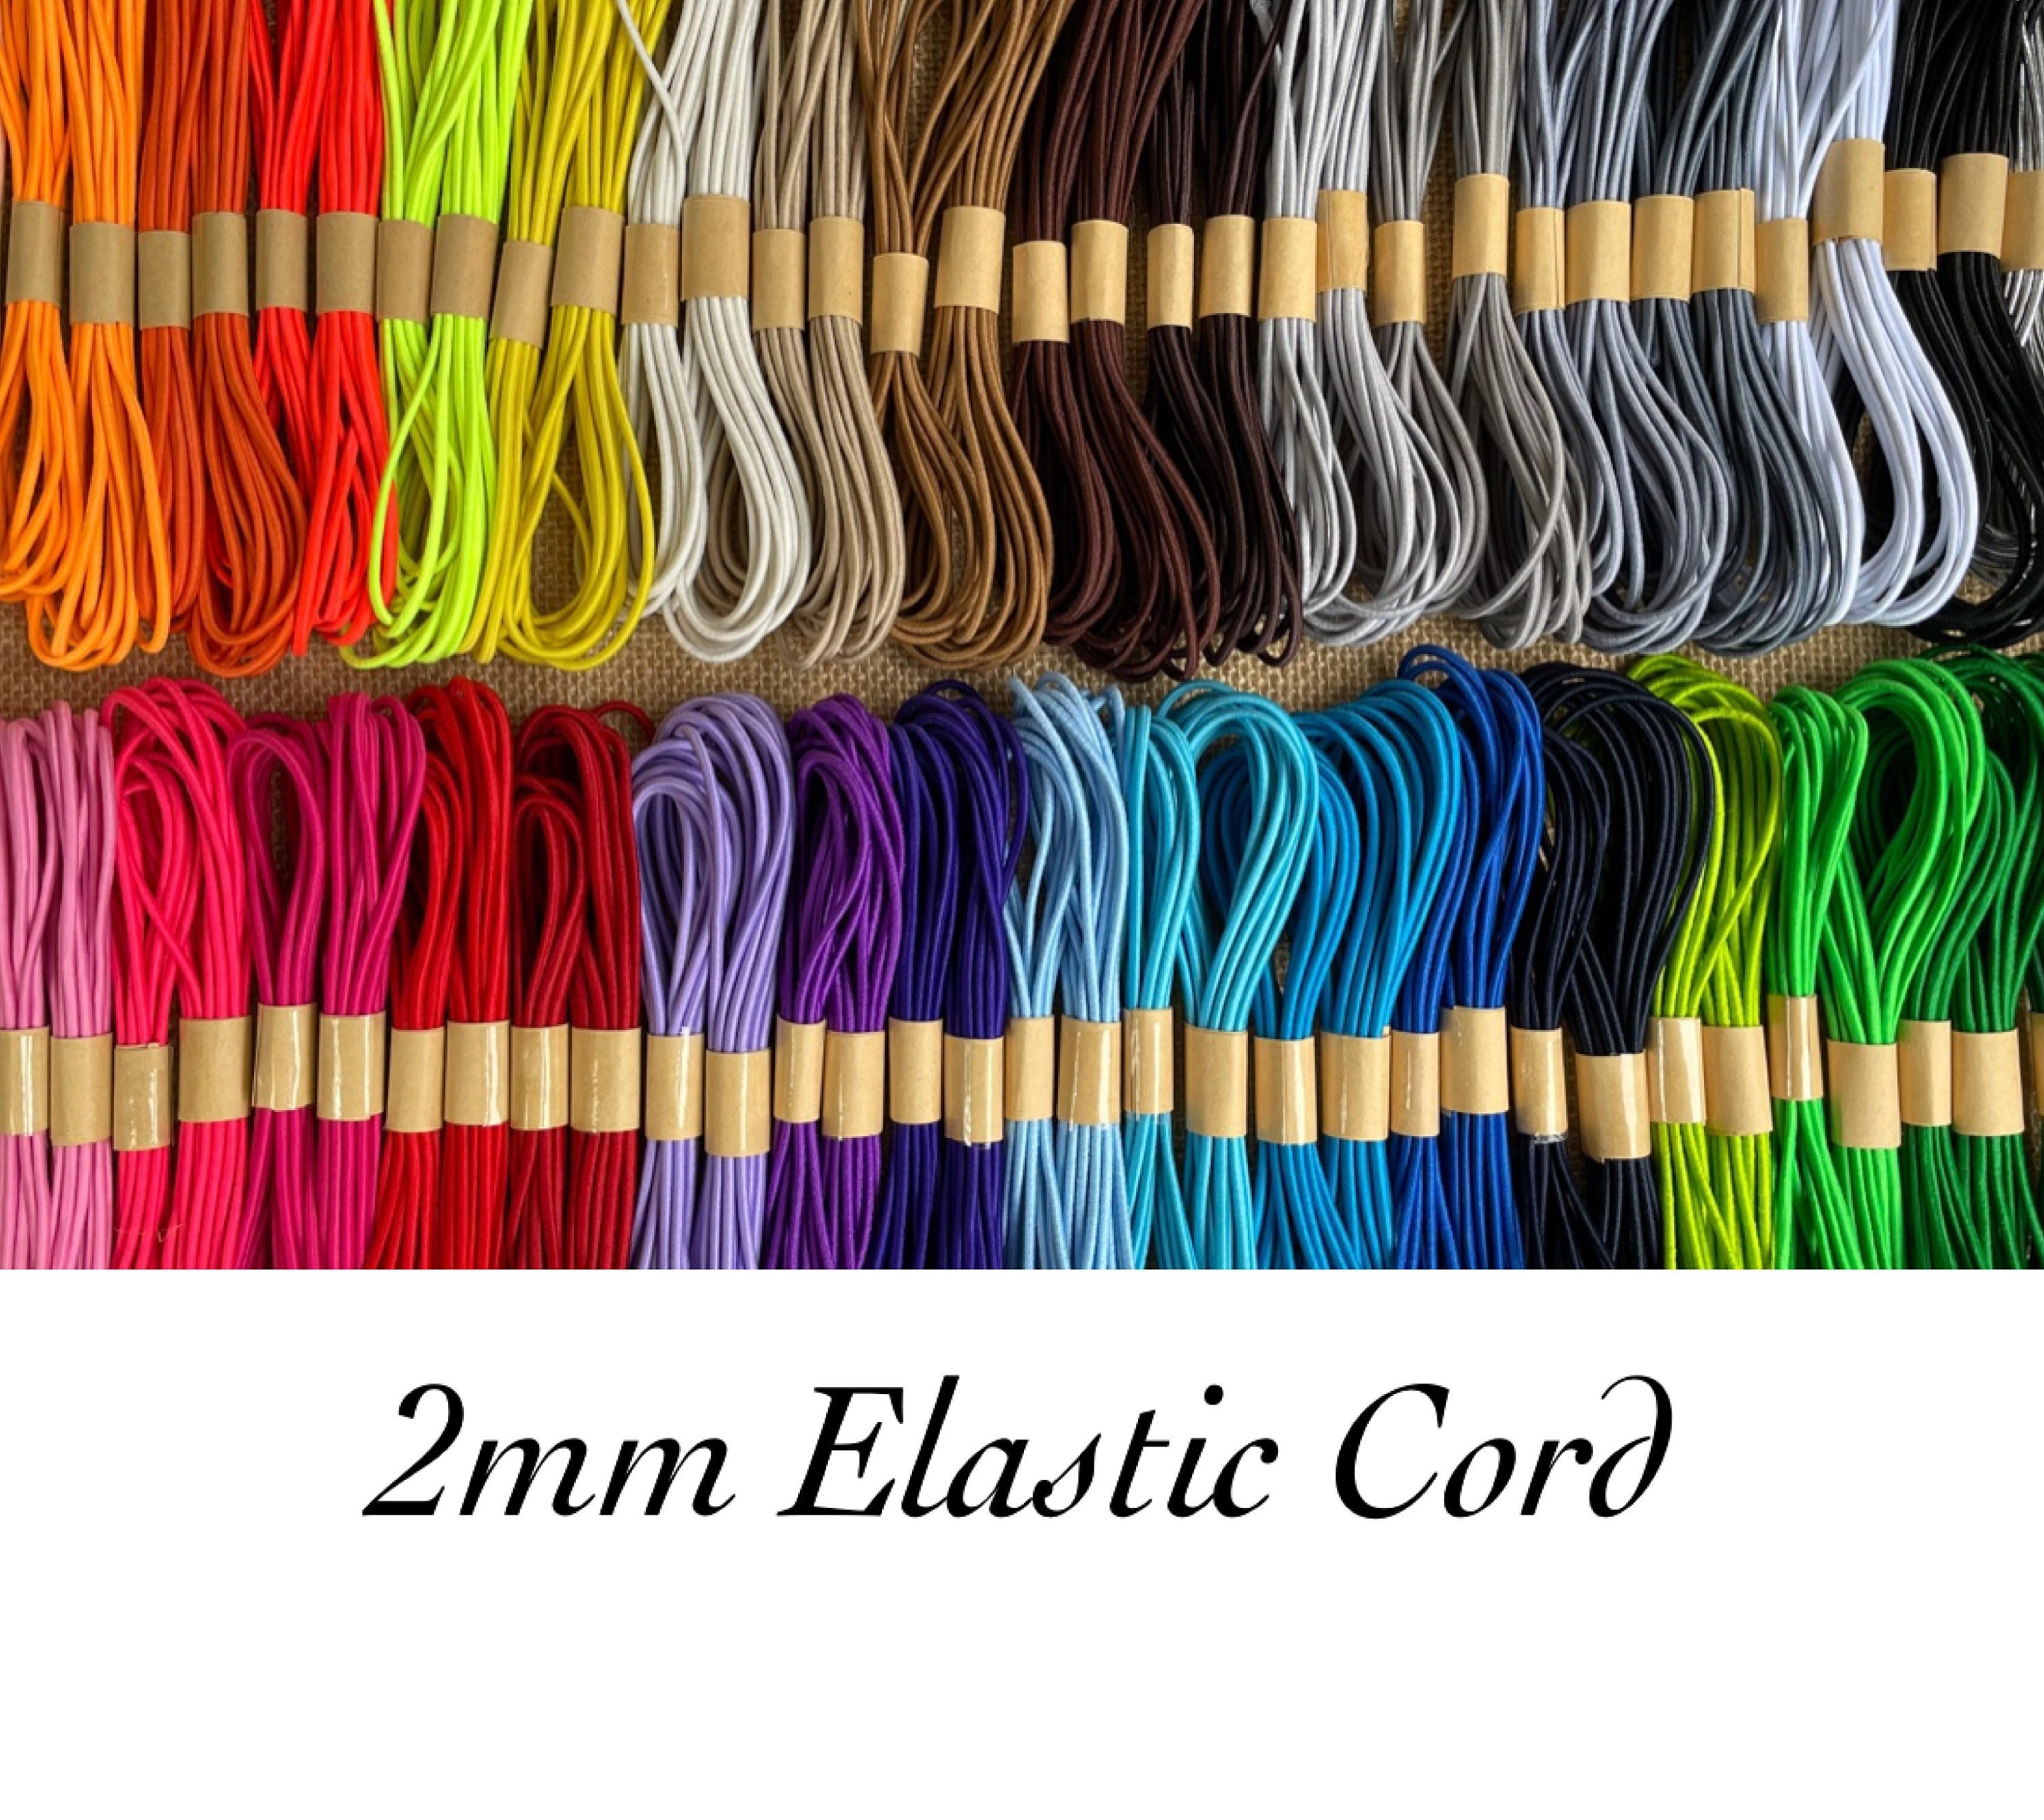 Elastic Stretch Cord, Stretchy String for Bracelets, 0.5mm 0.6mm 0.8mm 1mm,  Clear and Black Beading Thread 